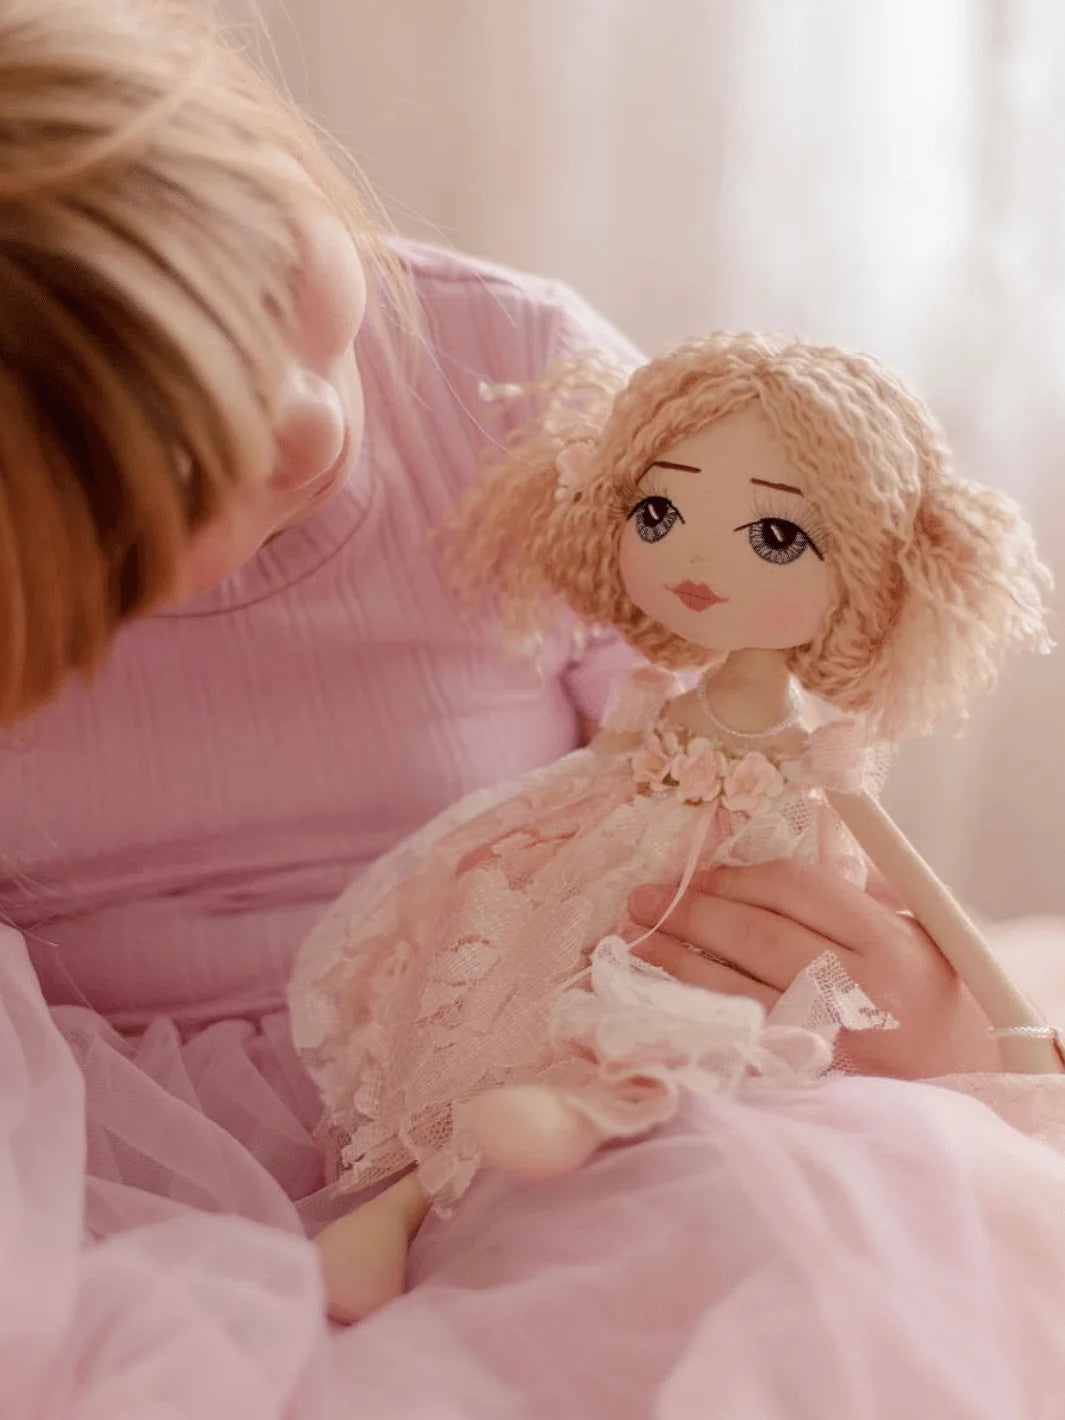 Handmade doll with blue eyes and blonde hair being held by a young girl wearing lavender dress